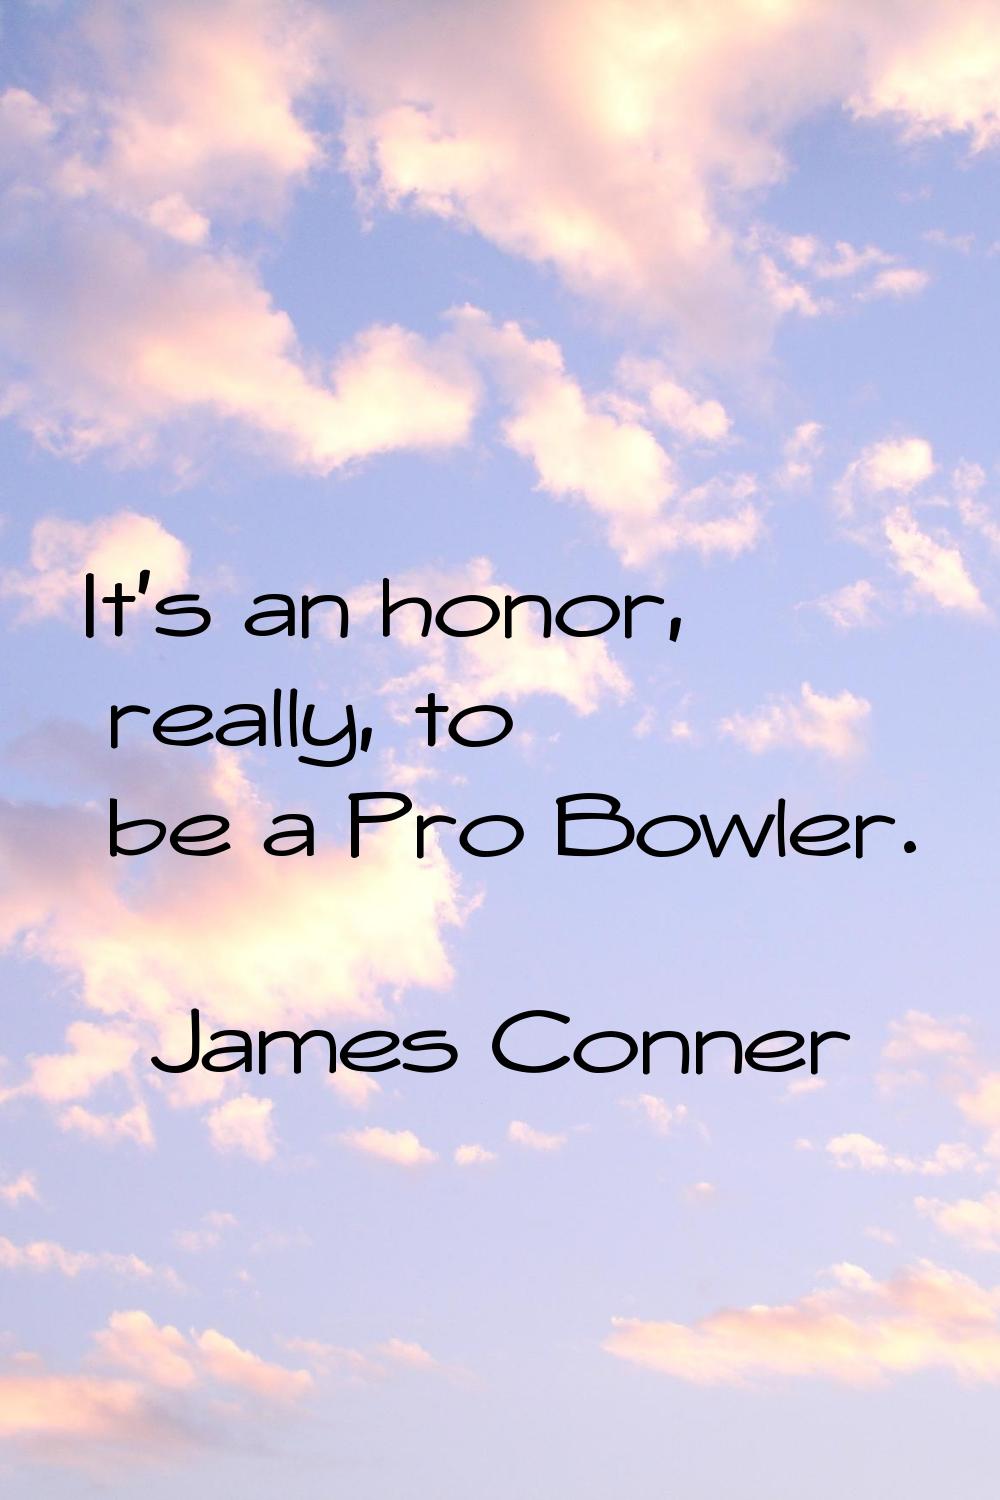 It's an honor, really, to be a Pro Bowler.